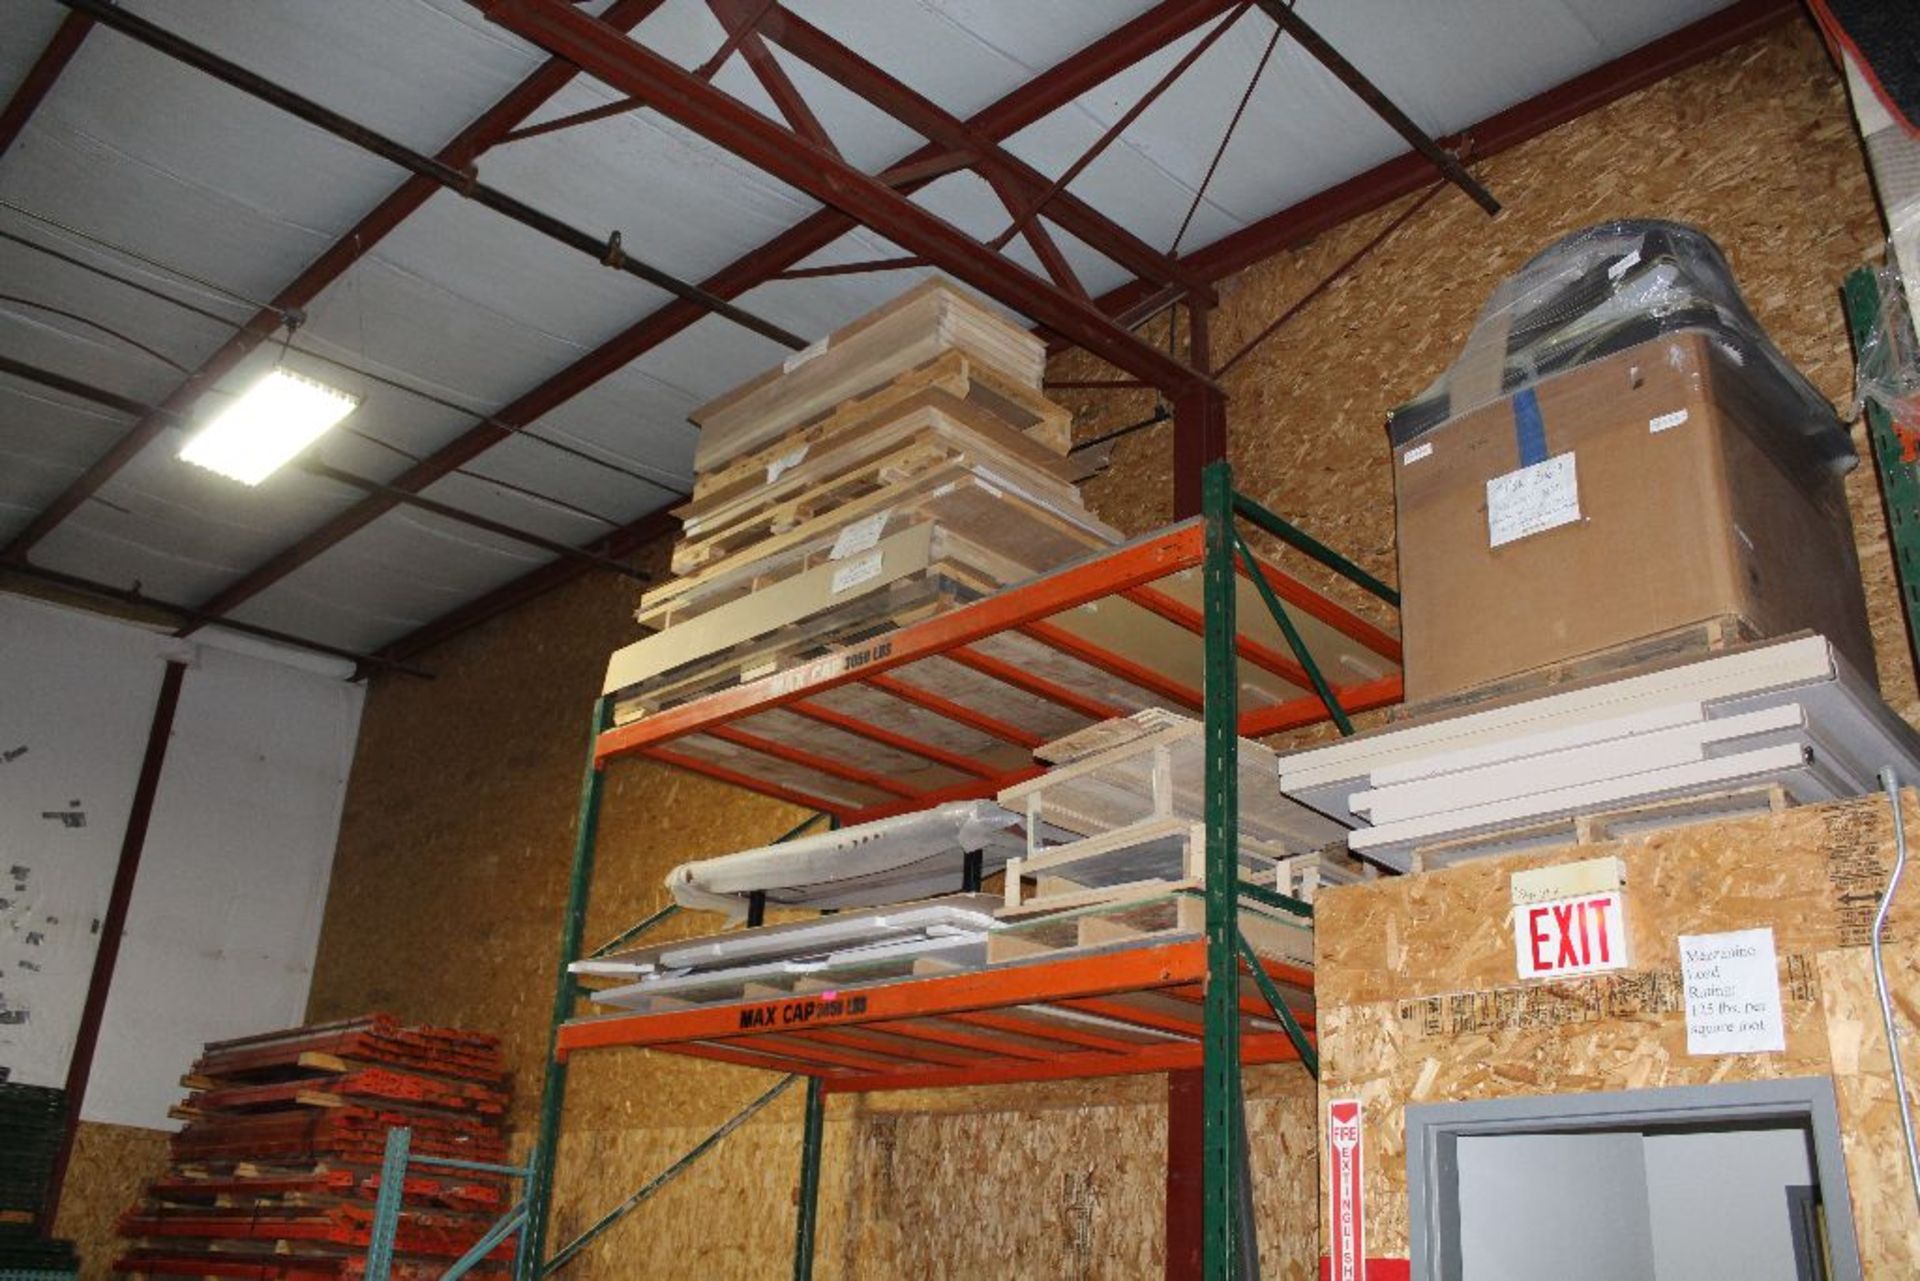 Contents on pallet racks: office dividers, files, cabinets. - Image 4 of 4